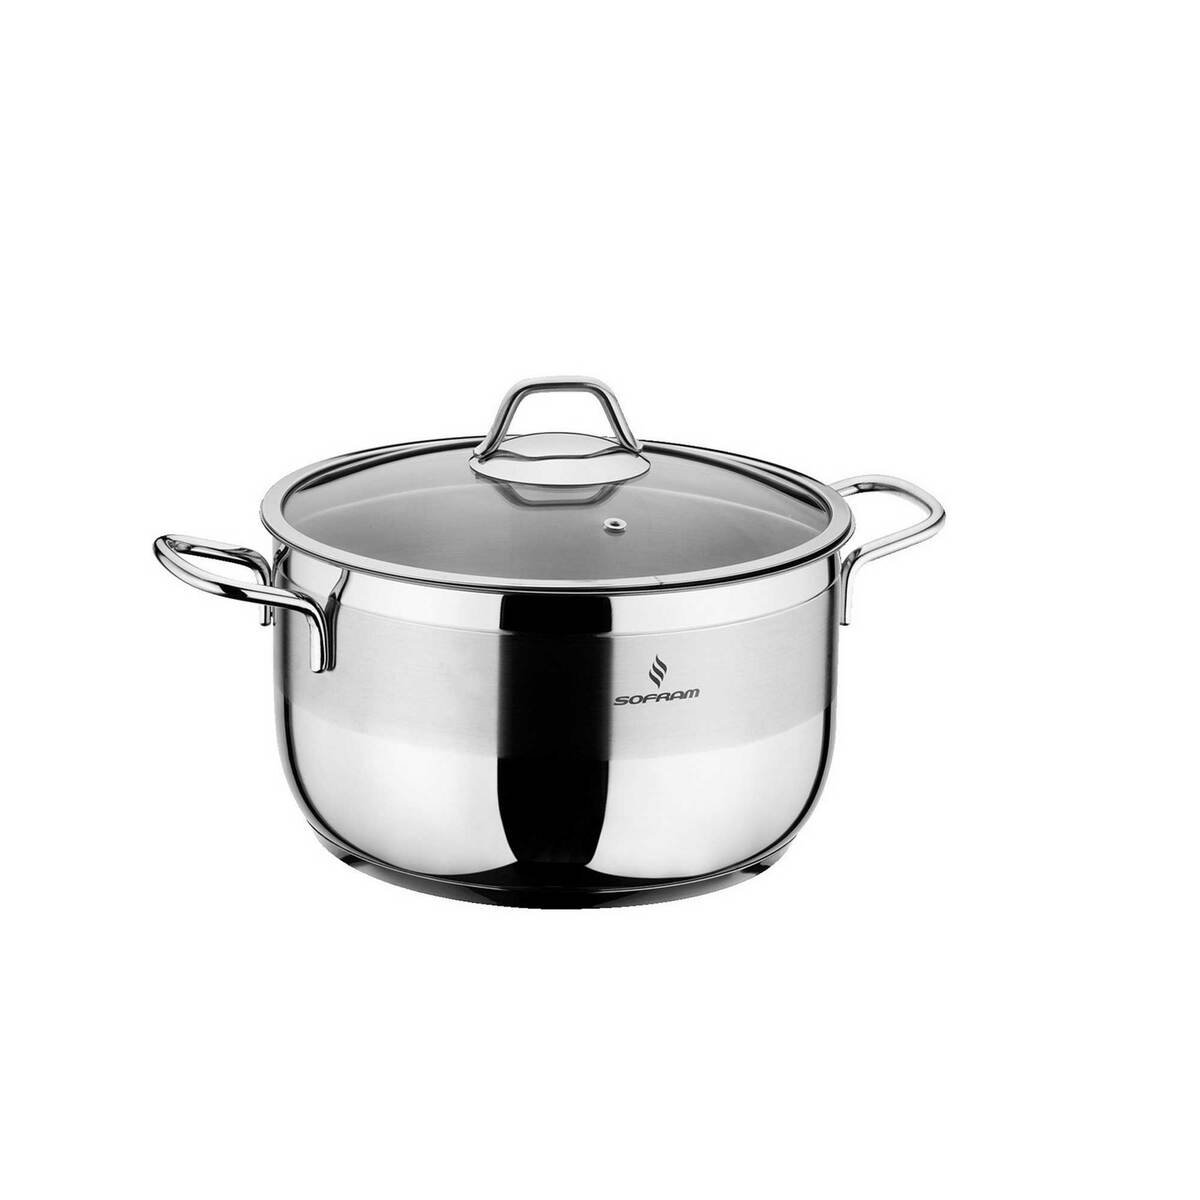 Sofram Stainless Steel Cooking Pot With Lid 14cm